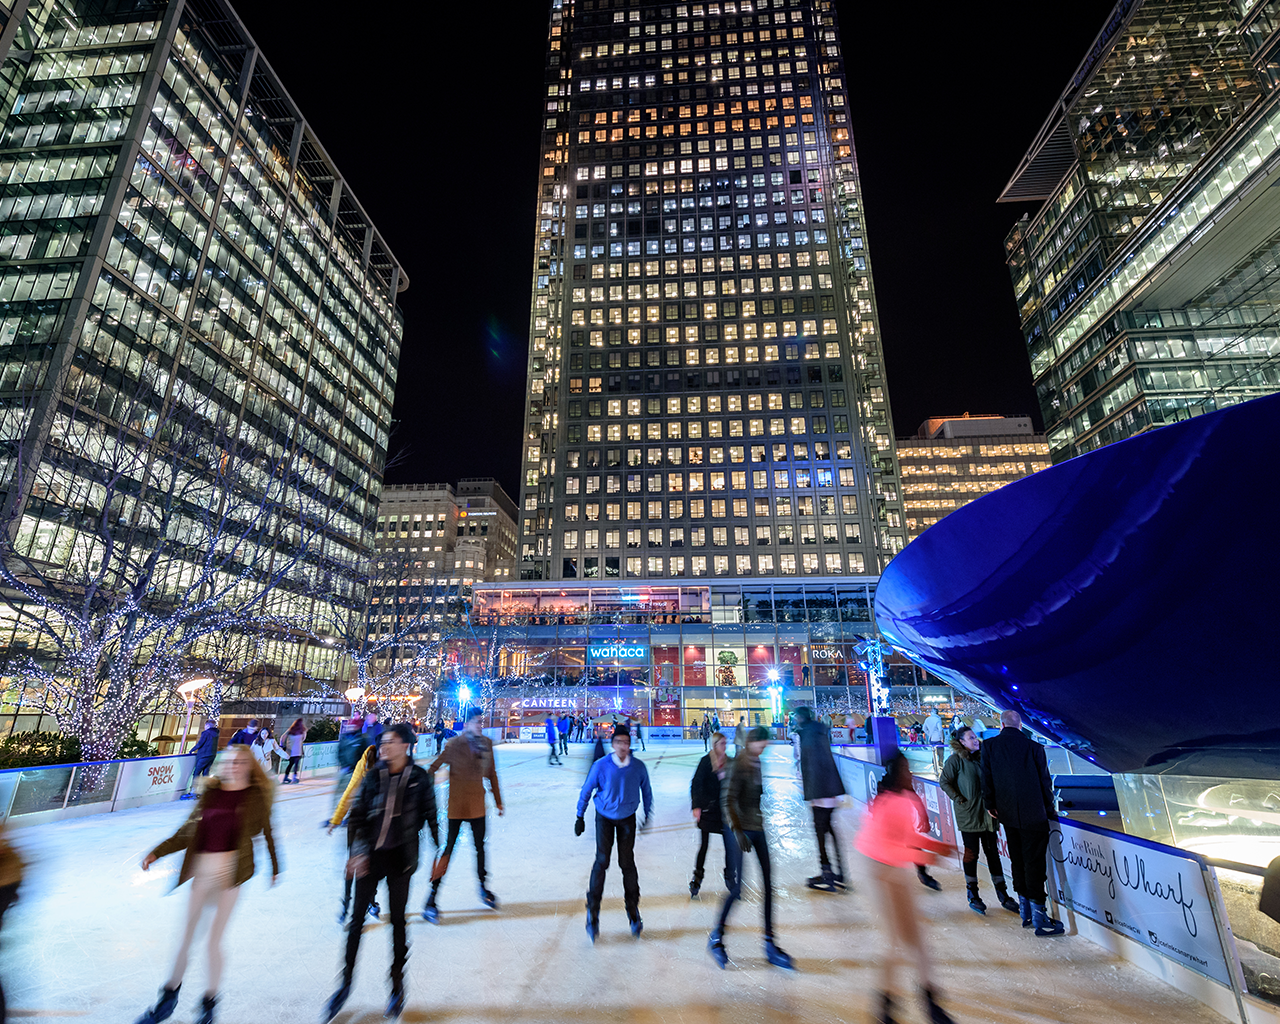 LuminoCity Ice Rink Canary Wharf in London Features More Than 500,000 LED Lights